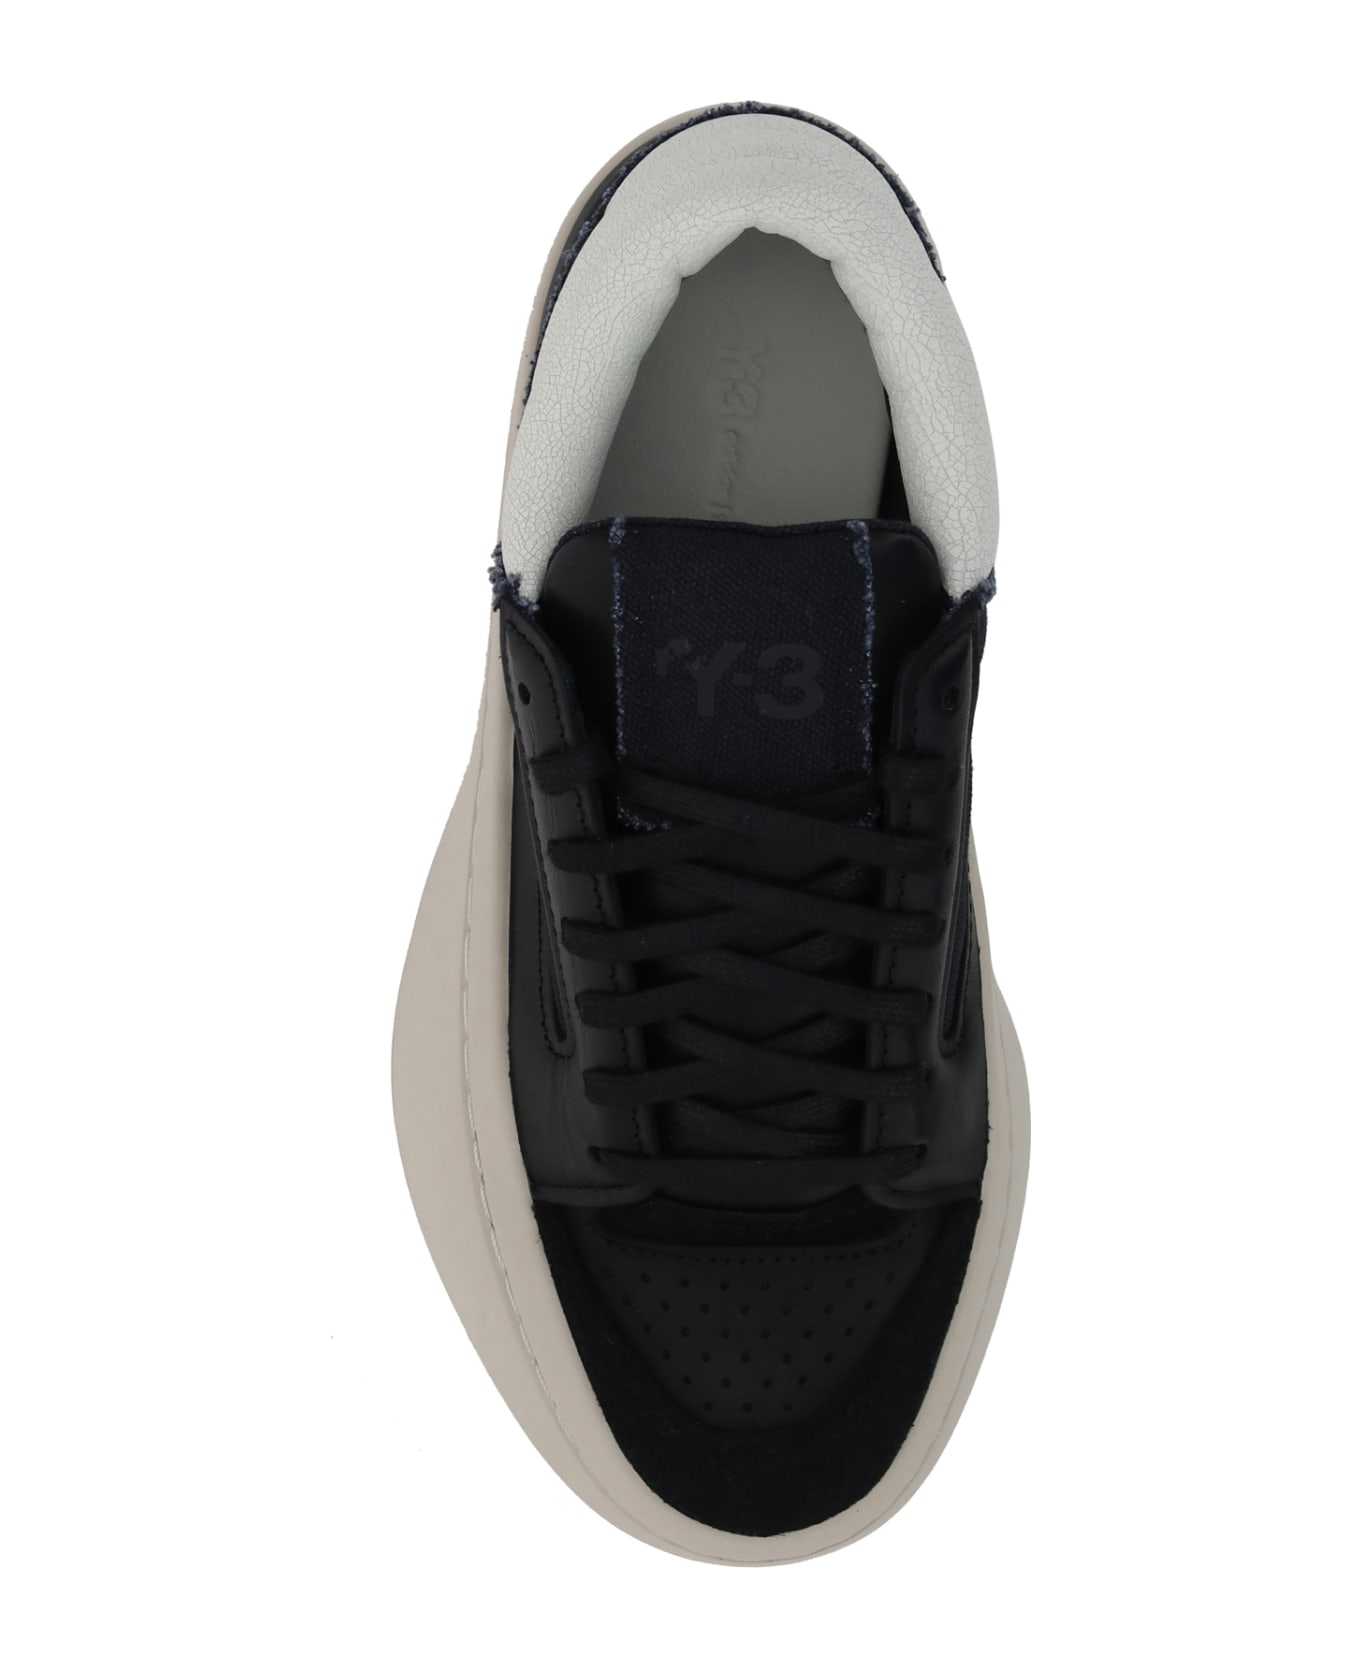 Y-3 Lux Bball Sneakers - Black